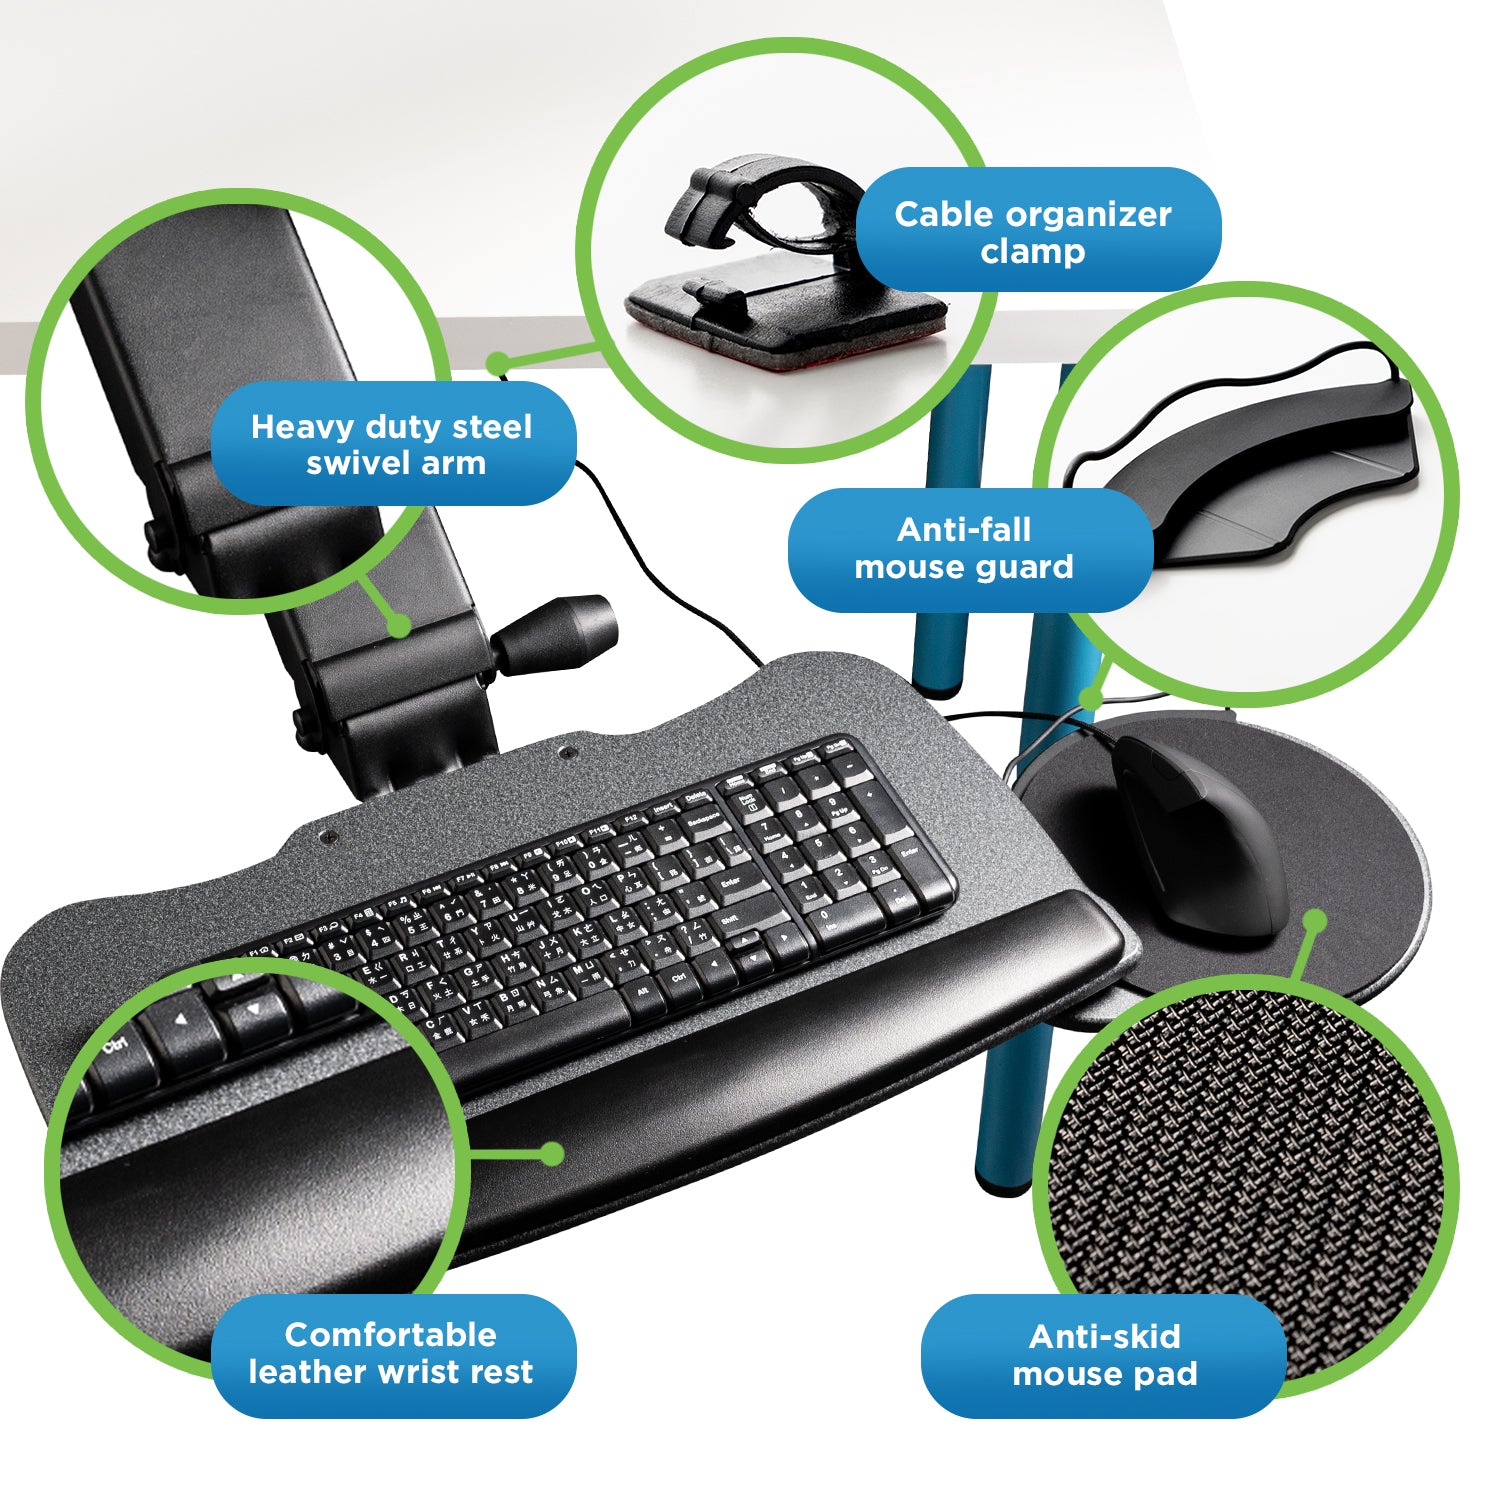 Relieve Daily Aches Pains With The Right Office Ergonomic